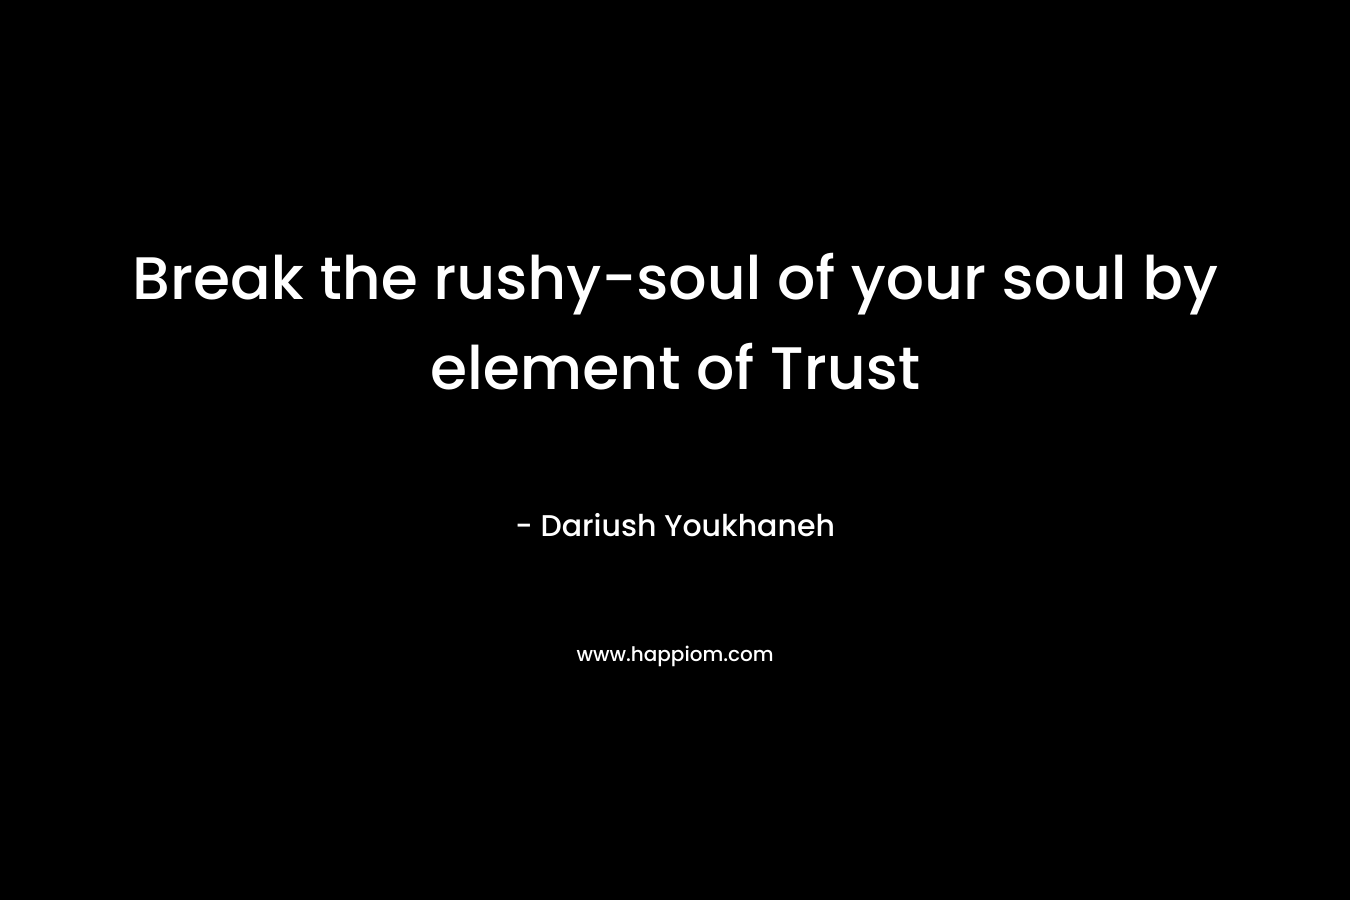 Break the rushy-soul of your soul by element of Trust